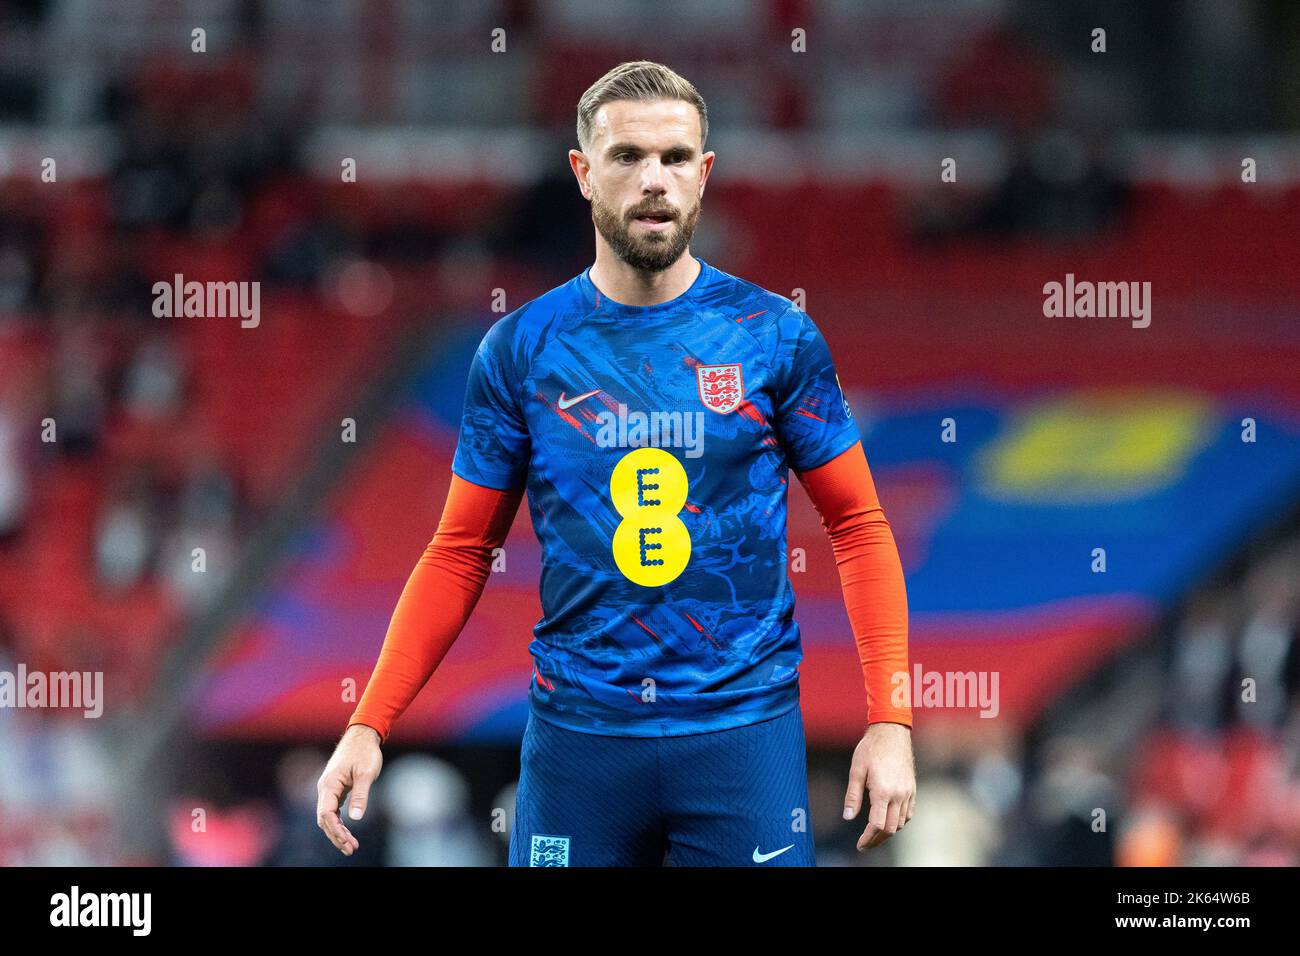 Jordan Henderson of England warms up before the UEFA Nations League match between England and Germany at Wembley Stadium, London on Monday 26th September 2022. (Credit: Pat Scaasi | MI News) Credit: MI News & Sport /Alamy Live News Stock Photo